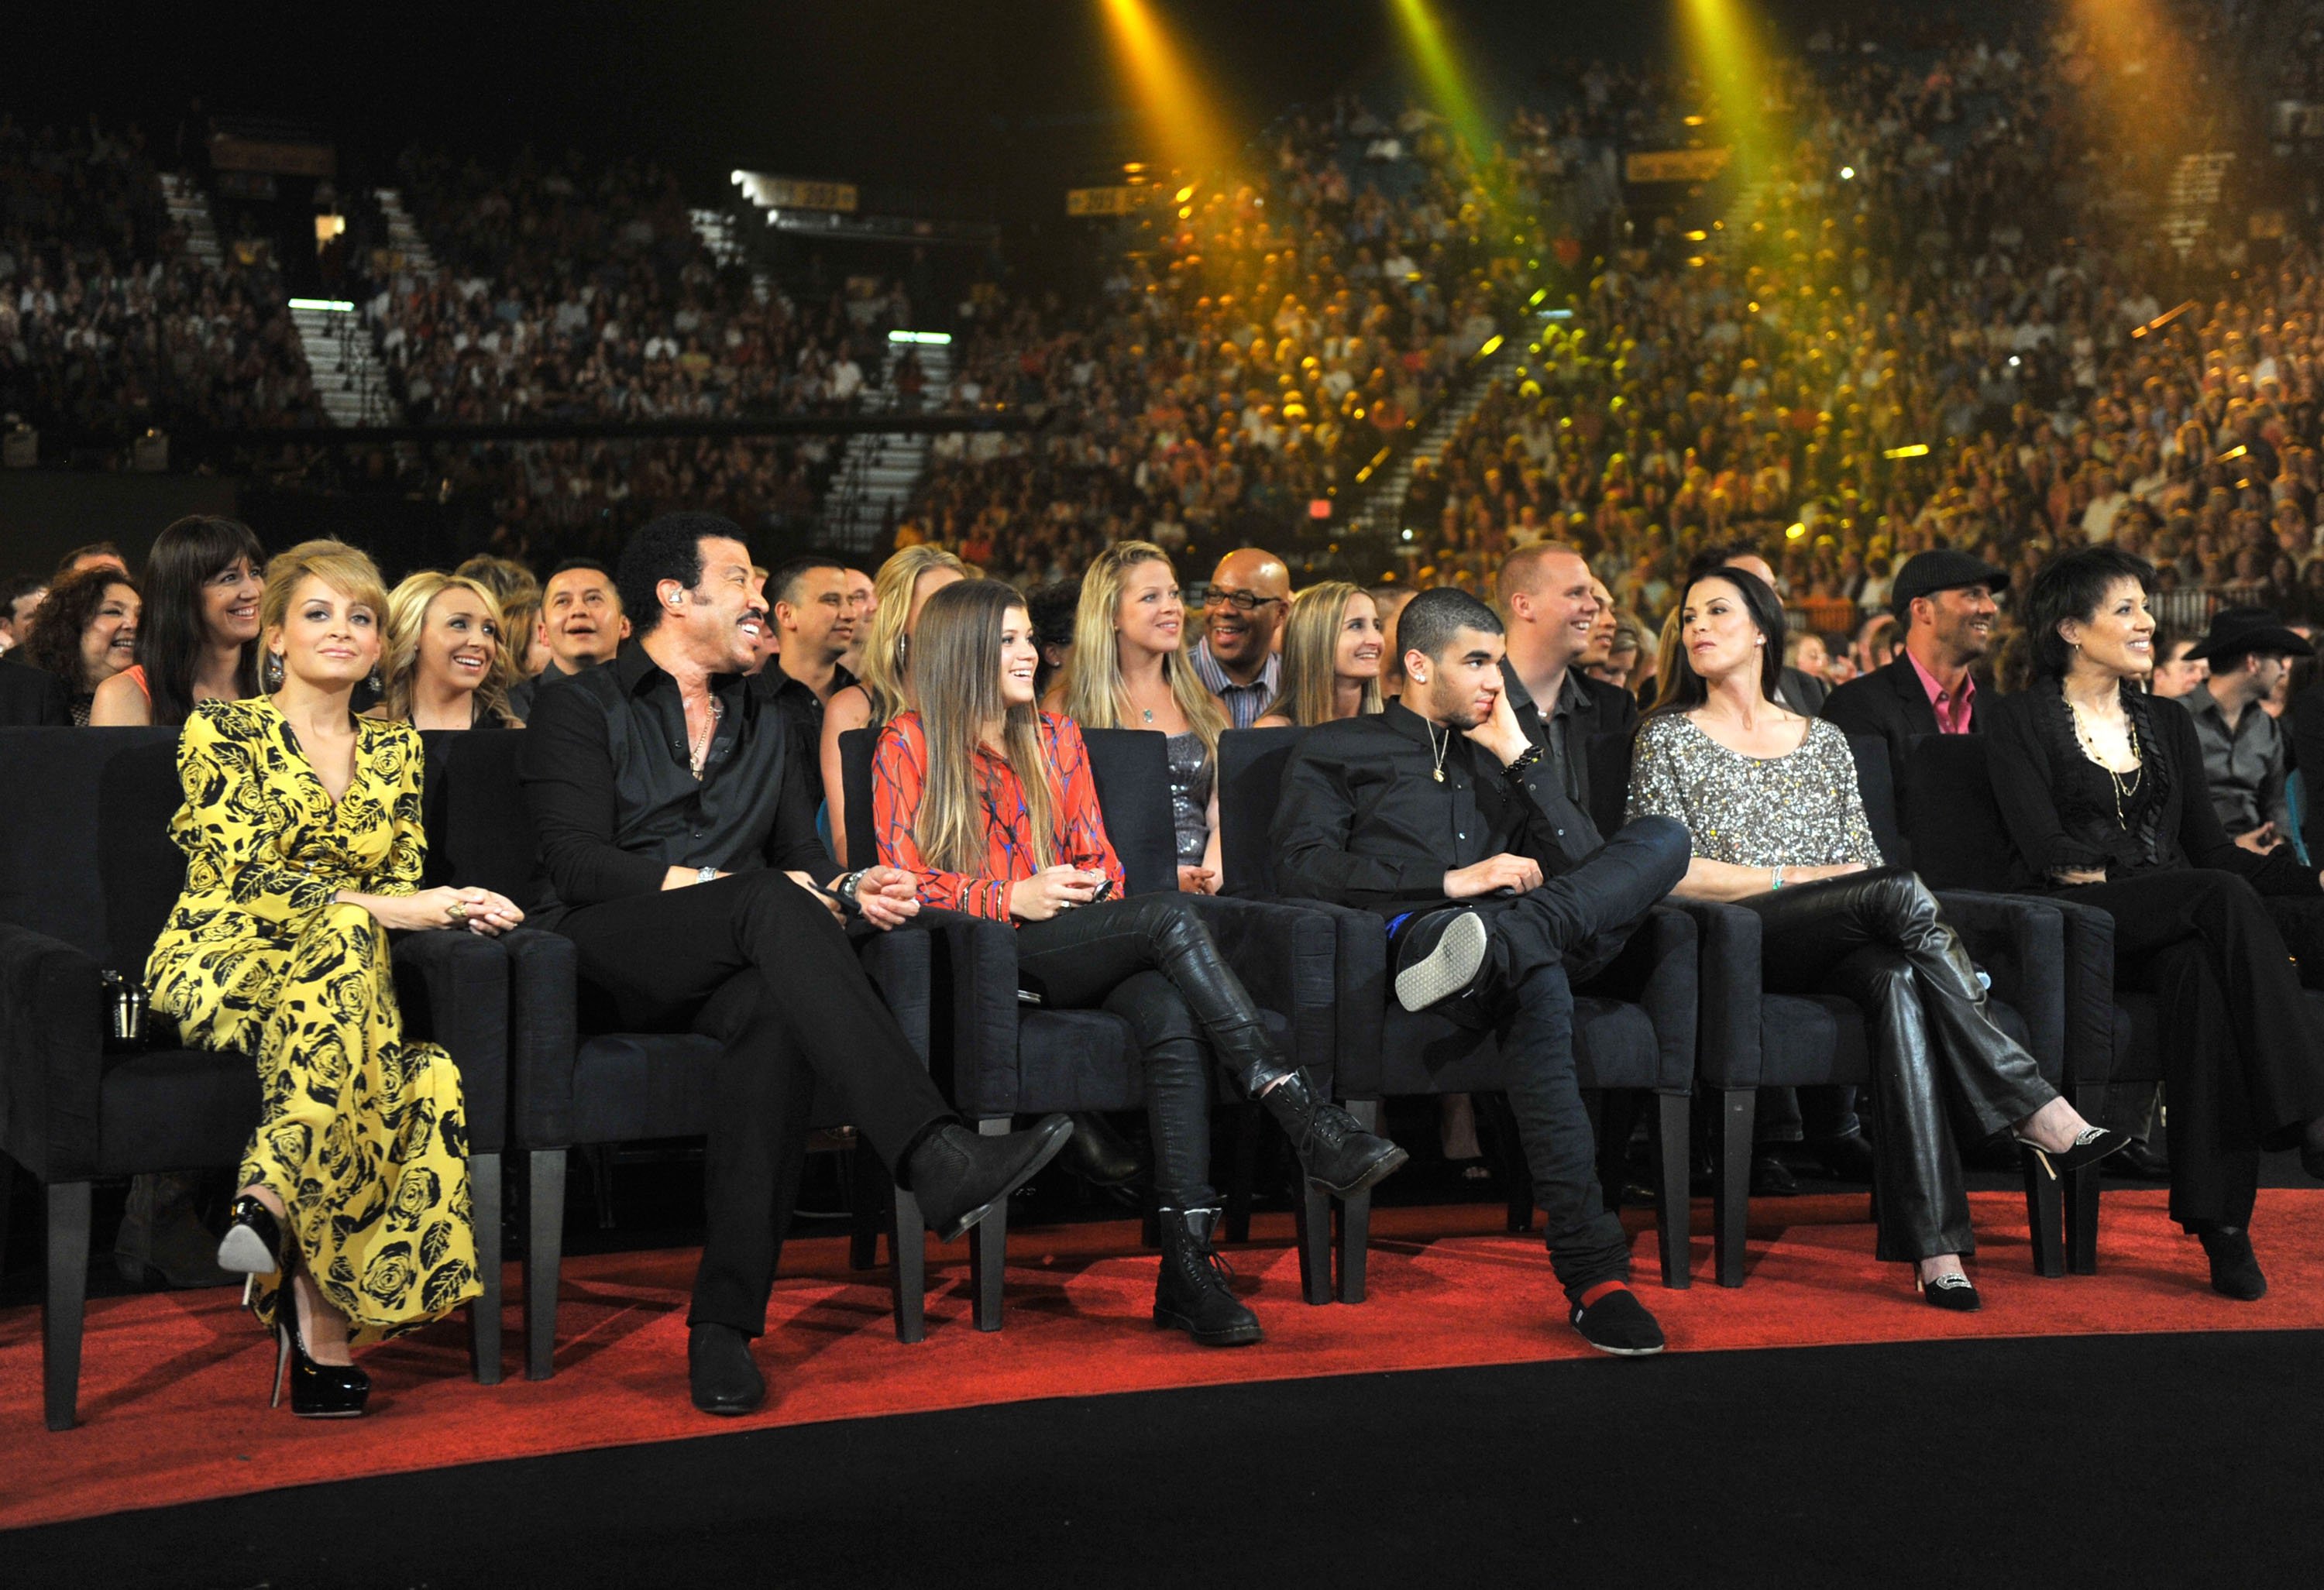 TV personality Nicole Richie, singer Lionel Richie, Sofia Richie, Miles Brockman Richie and Diane Alexander attend the Lionel Richie and Friends in Concert presented by ACM held at the MGM Grand Garden Arena on April 2, 2012 in Las Vegas, Nevada. | Source: Getty Images